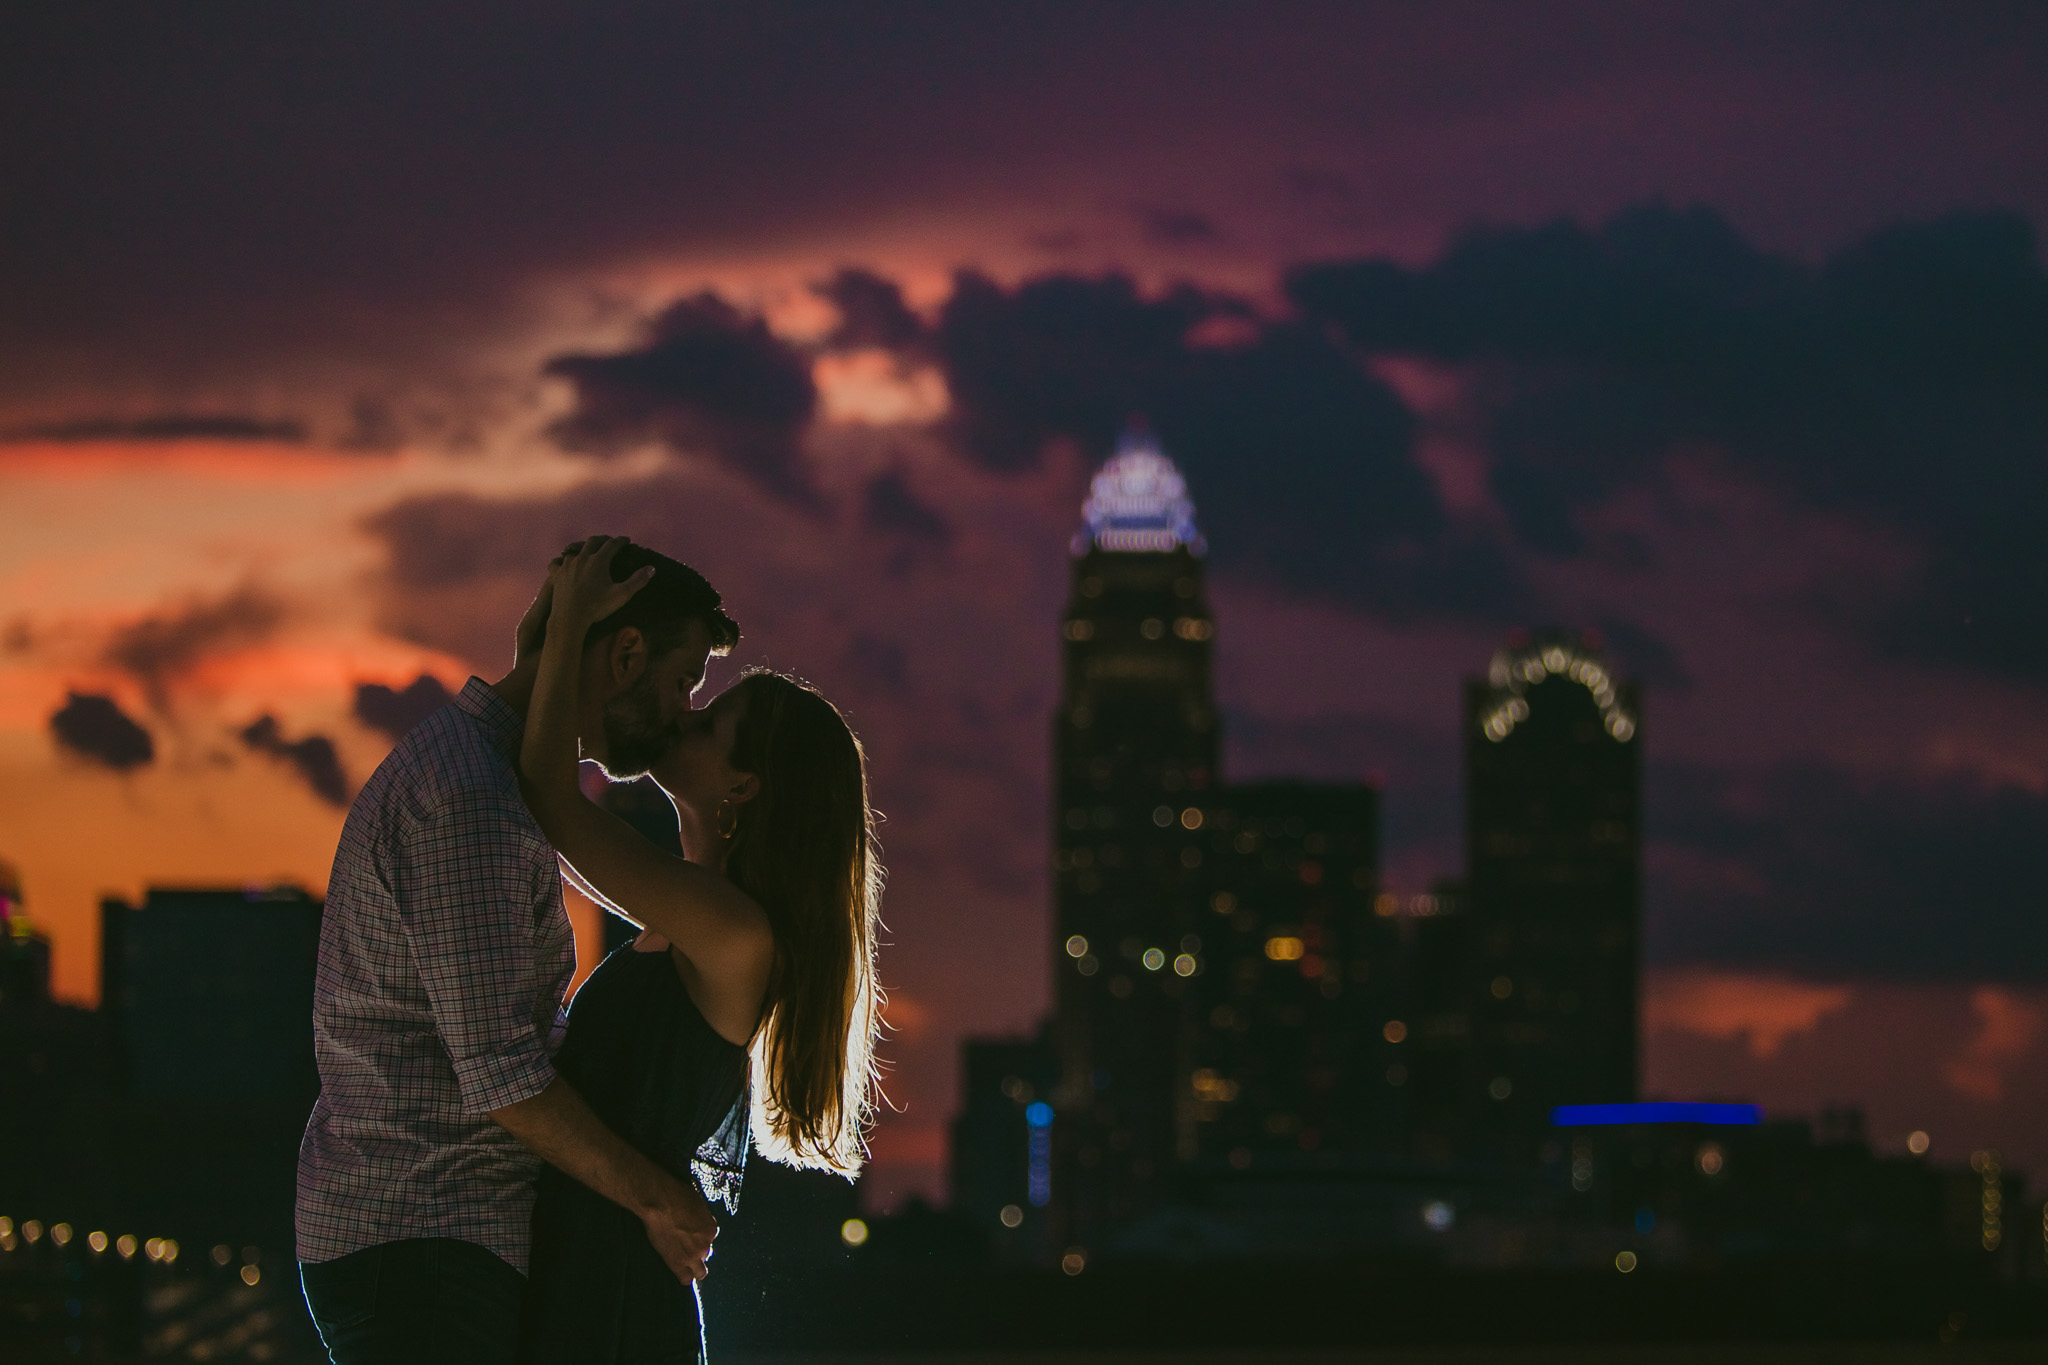 A romantic kiss against a colorful sunset sky in front of the Charlotte Skyline